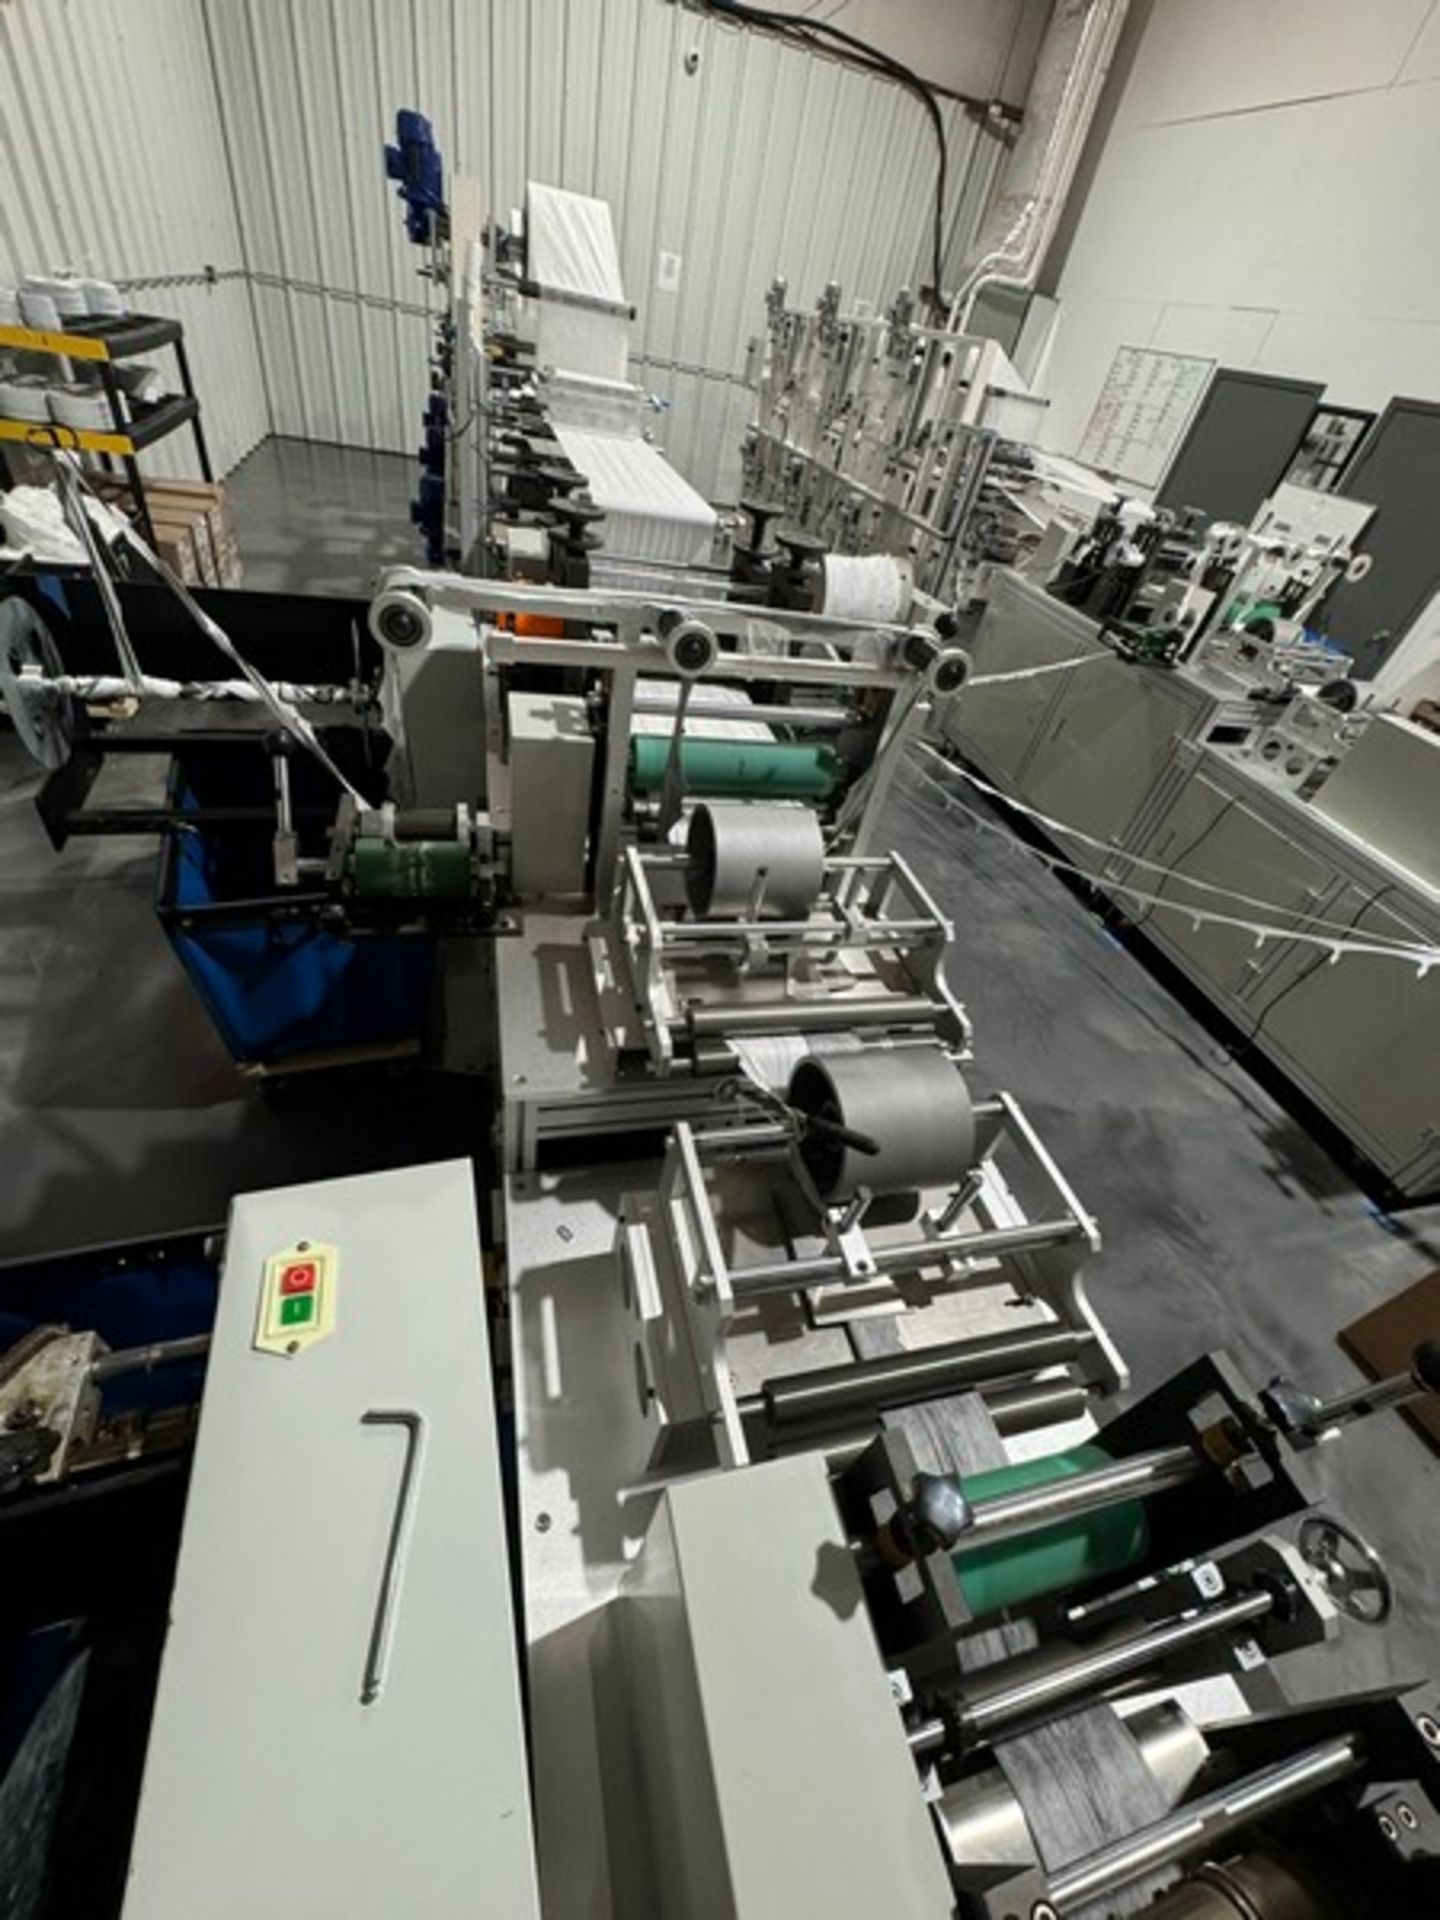 2022 KYD Automatic 4,000 Units Per Hour Mask Manufacturing Line, Includes Unwinding Station, Rolling - Image 12 of 14